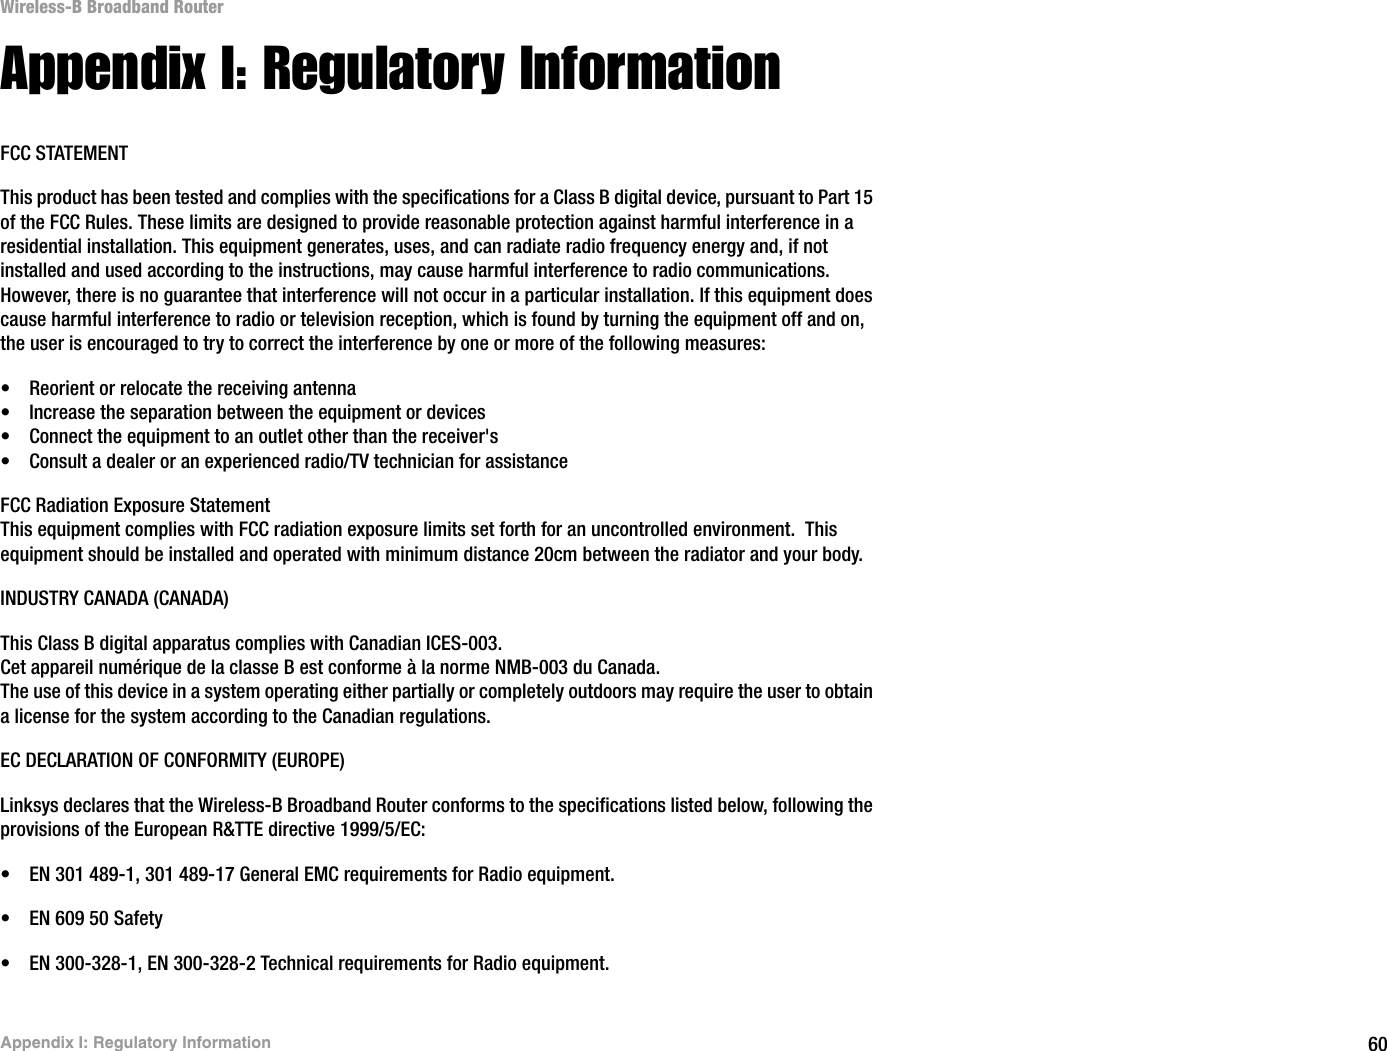 60Appendix I: Regulatory InformationWireless-B Broadband RouterAppendix I: Regulatory InformationFCC STATEMENTThis product has been tested and complies with the specifications for a Class B digital device, pursuant to Part 15 of the FCC Rules. These limits are designed to provide reasonable protection against harmful interference in a residential installation. This equipment generates, uses, and can radiate radio frequency energy and, if not installed and used according to the instructions, may cause harmful interference to radio communications. However, there is no guarantee that interference will not occur in a particular installation. If this equipment does cause harmful interference to radio or television reception, which is found by turning the equipment off and on, the user is encouraged to try to correct the interference by one or more of the following measures:• Reorient or relocate the receiving antenna• Increase the separation between the equipment or devices• Connect the equipment to an outlet other than the receiver&apos;s• Consult a dealer or an experienced radio/TV technician for assistanceFCC Radiation Exposure StatementThis equipment complies with FCC radiation exposure limits set forth for an uncontrolled environment.  This equipment should be installed and operated with minimum distance 20cm between the radiator and your body.INDUSTRY CANADA (CANADA)This Class B digital apparatus complies with Canadian ICES-003.Cet appareil numérique de la classe B est conforme à la norme NMB-003 du Canada.The use of this device in a system operating either partially or completely outdoors may require the user to obtain a license for the system according to the Canadian regulations.EC DECLARATION OF CONFORMITY (EUROPE)Linksys declares that the Wireless-B Broadband Router conforms to the specifications listed below, following the provisions of the European R&amp;TTE directive 1999/5/EC: • EN 301 489-1, 301 489-17 General EMC requirements for Radio equipment.• EN 609 50 Safety• EN 300-328-1, EN 300-328-2 Technical requirements for Radio equipment.